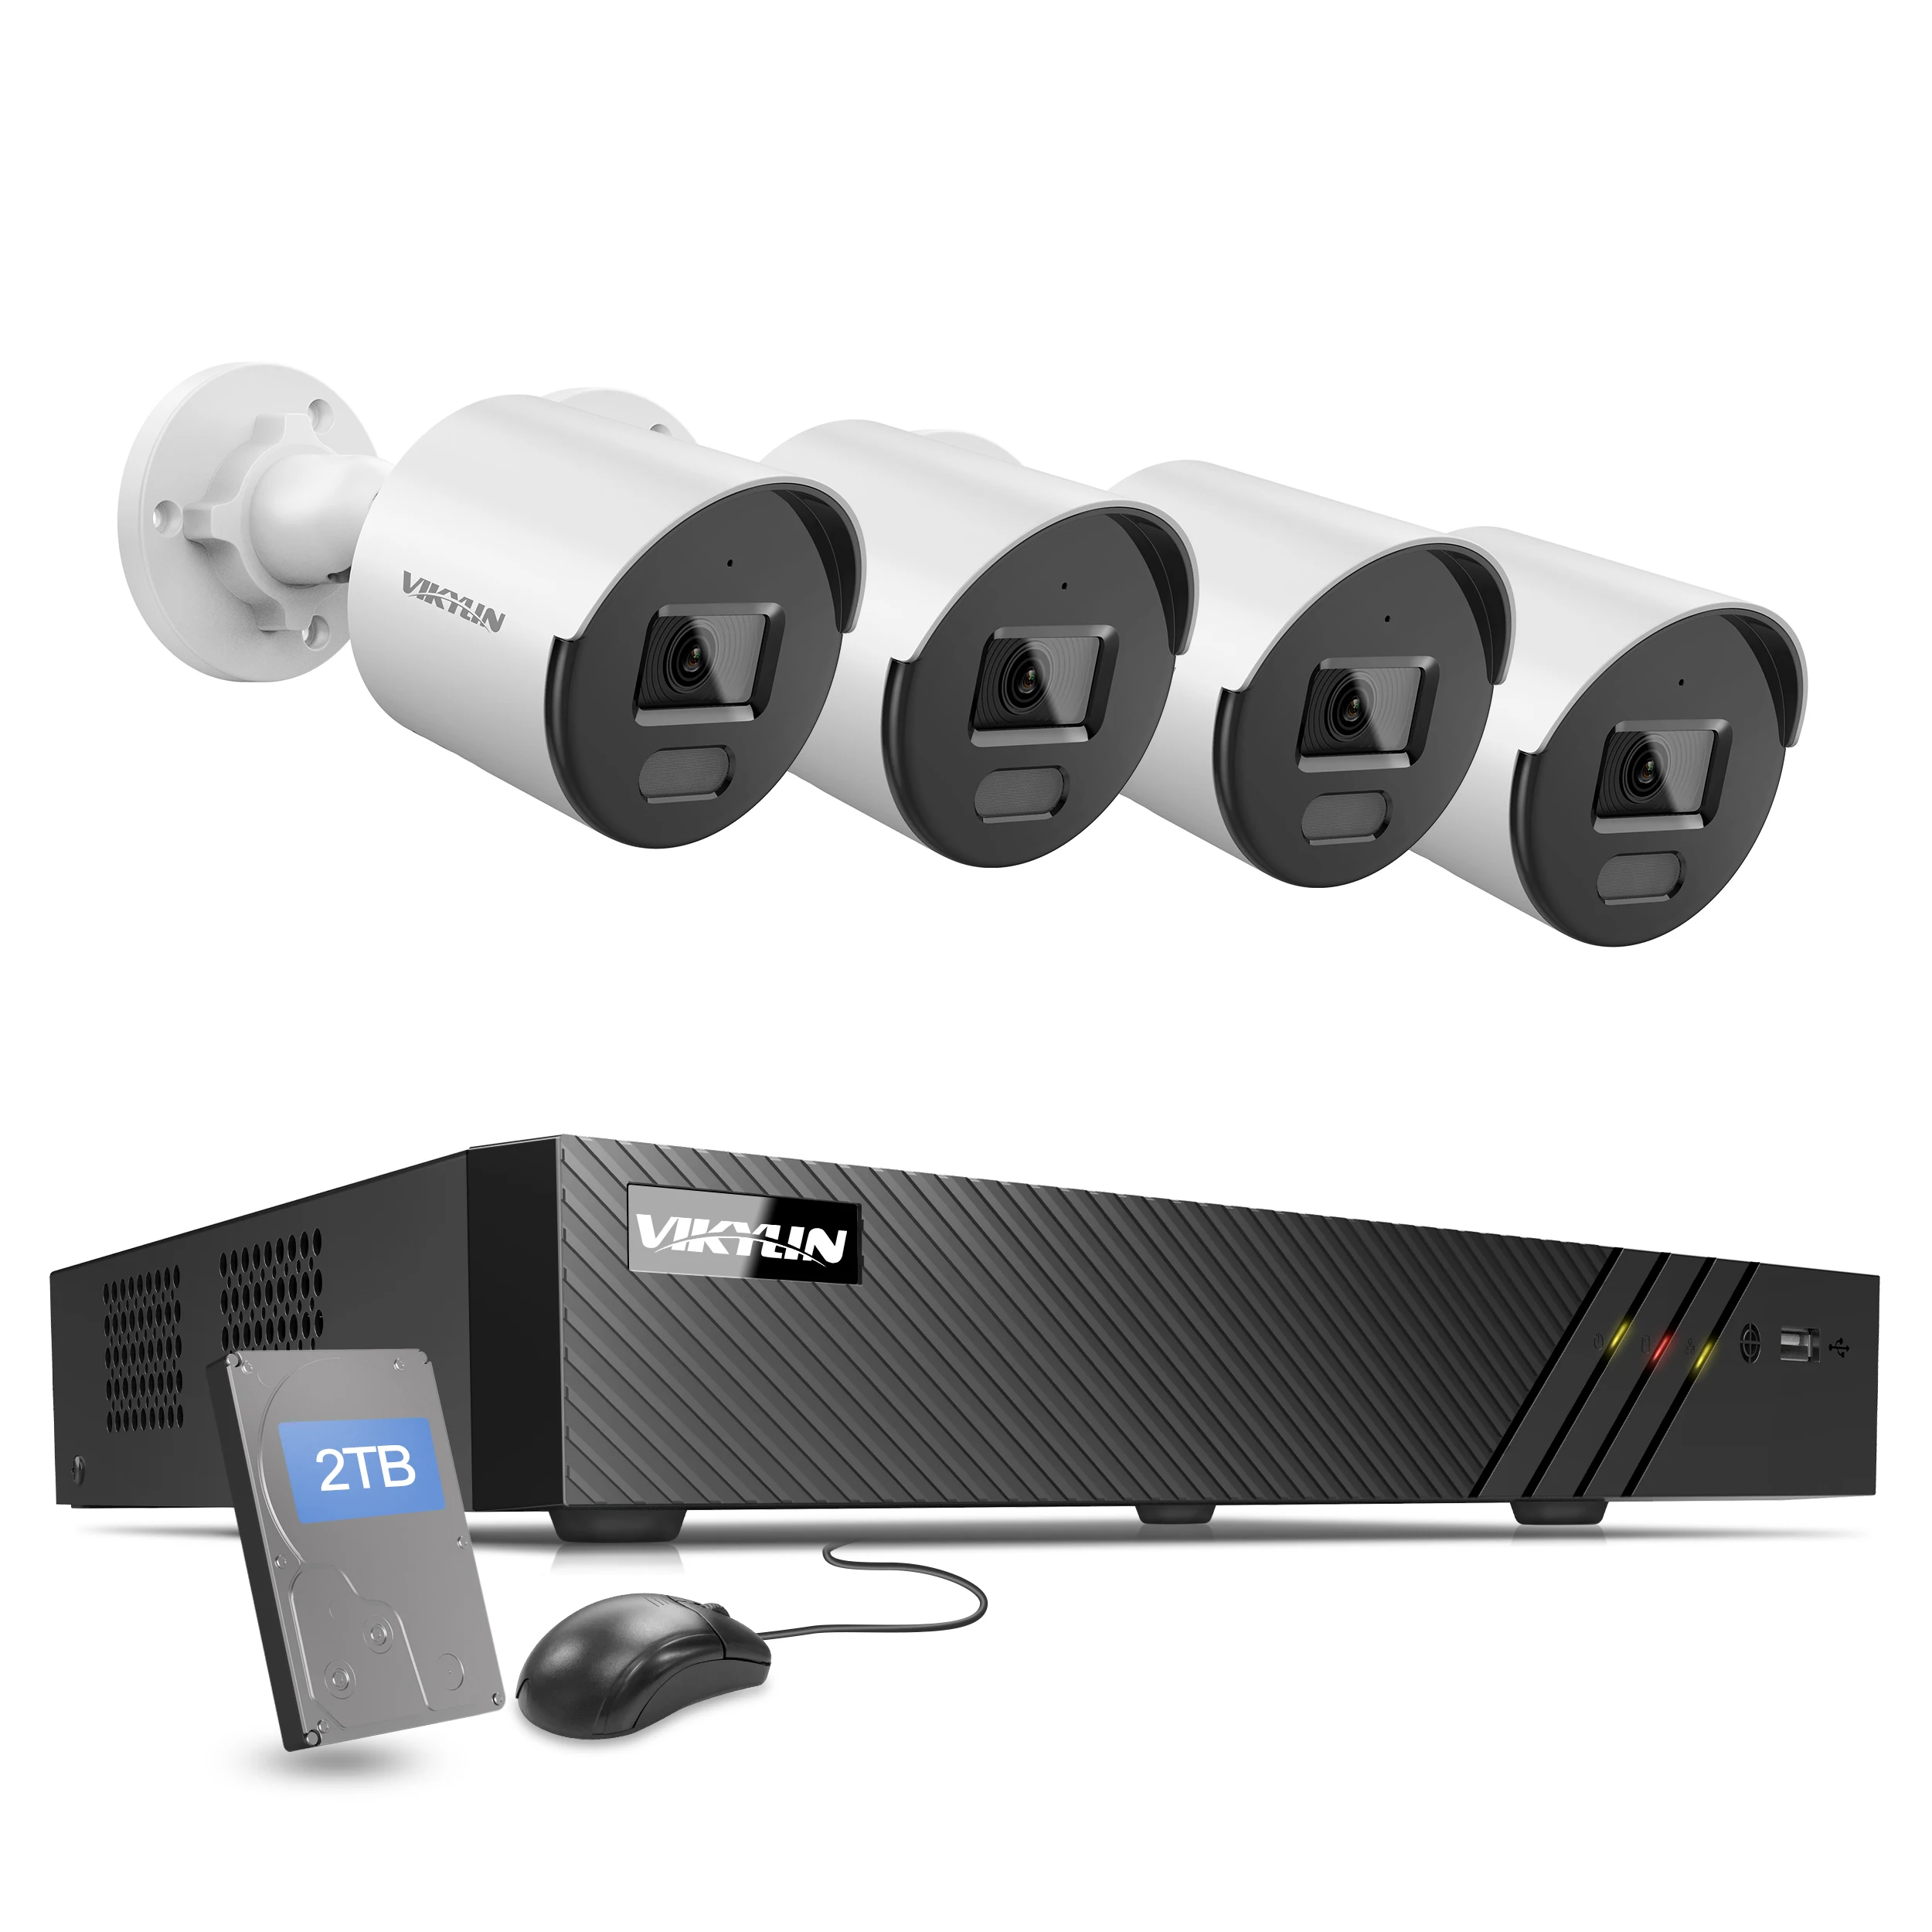 full color vikylin cube turet indoor outdoor ip67 mic sd slot 5MP motion detection 8ch poe nvr security camera cctv system